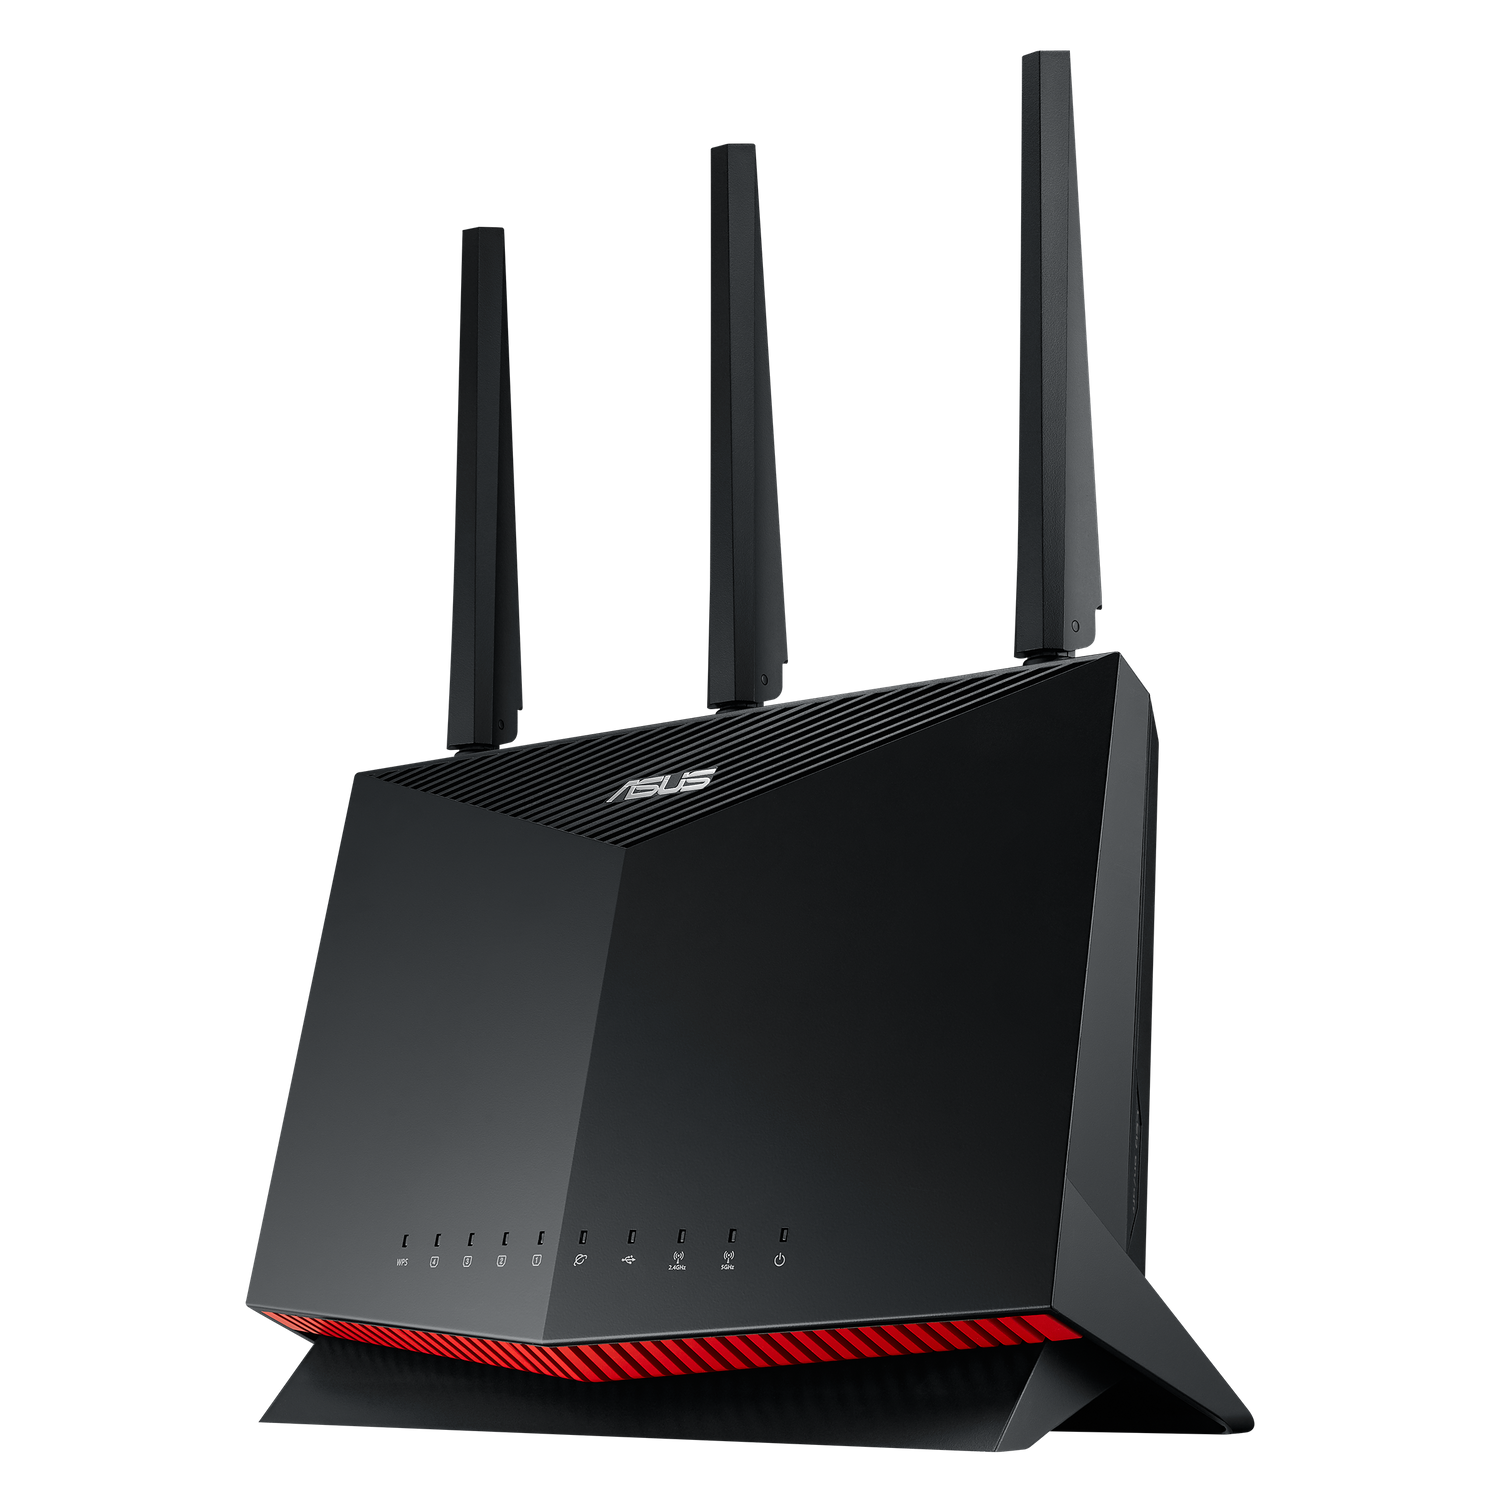 ASUS RT-AX86S WLAN AX5700 ROUTER